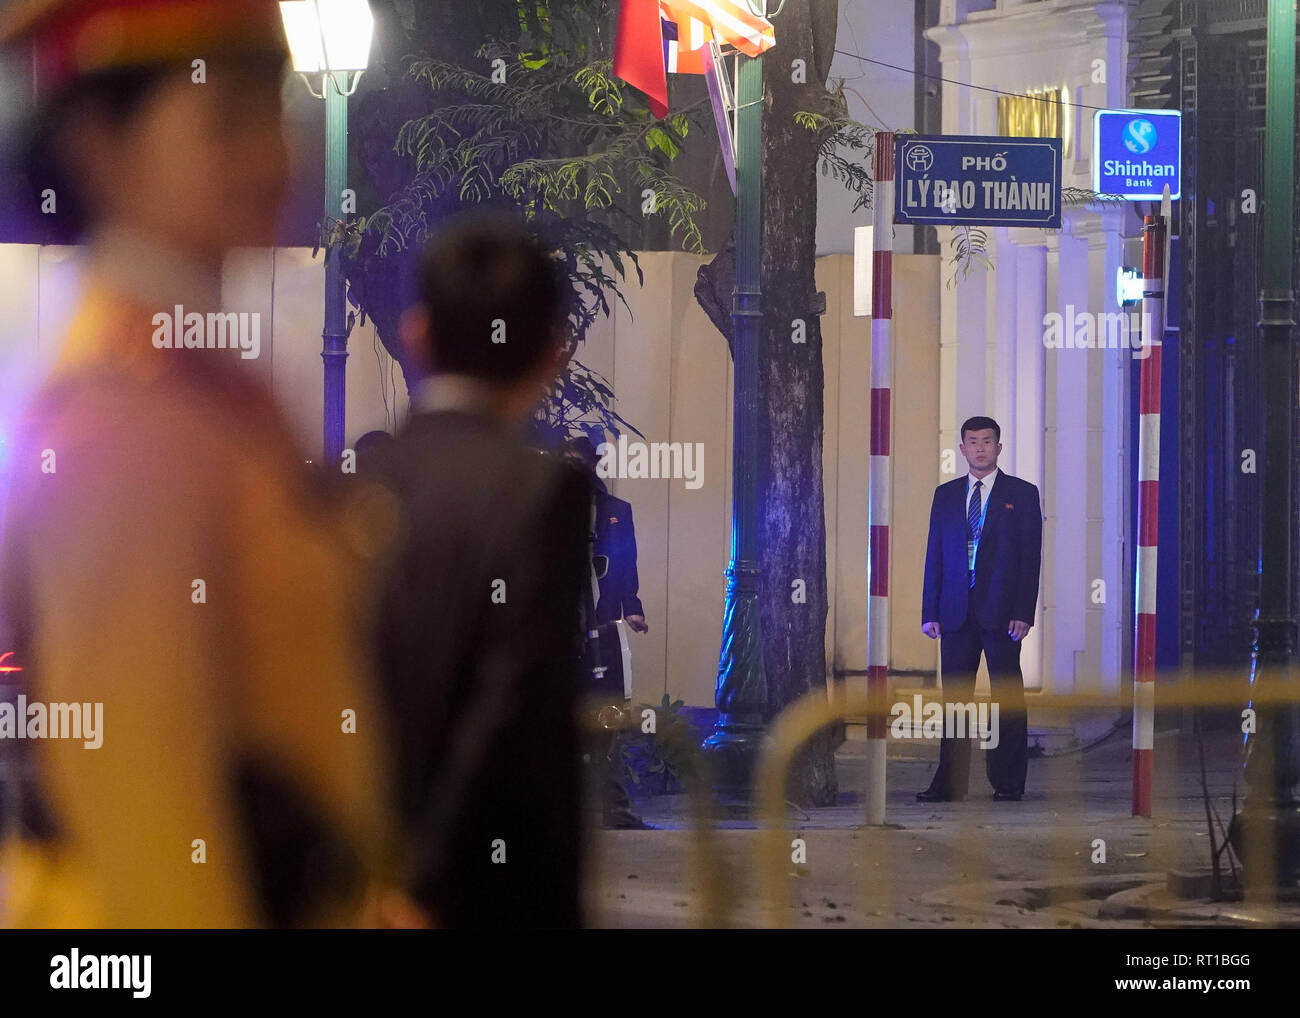 Hanoi, Vietnam. 27th Feb, 2019. February 27, 2019 - Hanoi, Vietnam - A North Korean security guard stands on a street leading to the Sofitel Legend Metropole hotel where North Korean Leader Kim Jong Un and U.S. President Donald Trump met for dinner during the second North Korea-U.S. Summit in the capital city of Hanoi, Vietnam. Credit: Christopher Jue/ZUMA Wire/Alamy Live News Stock Photo